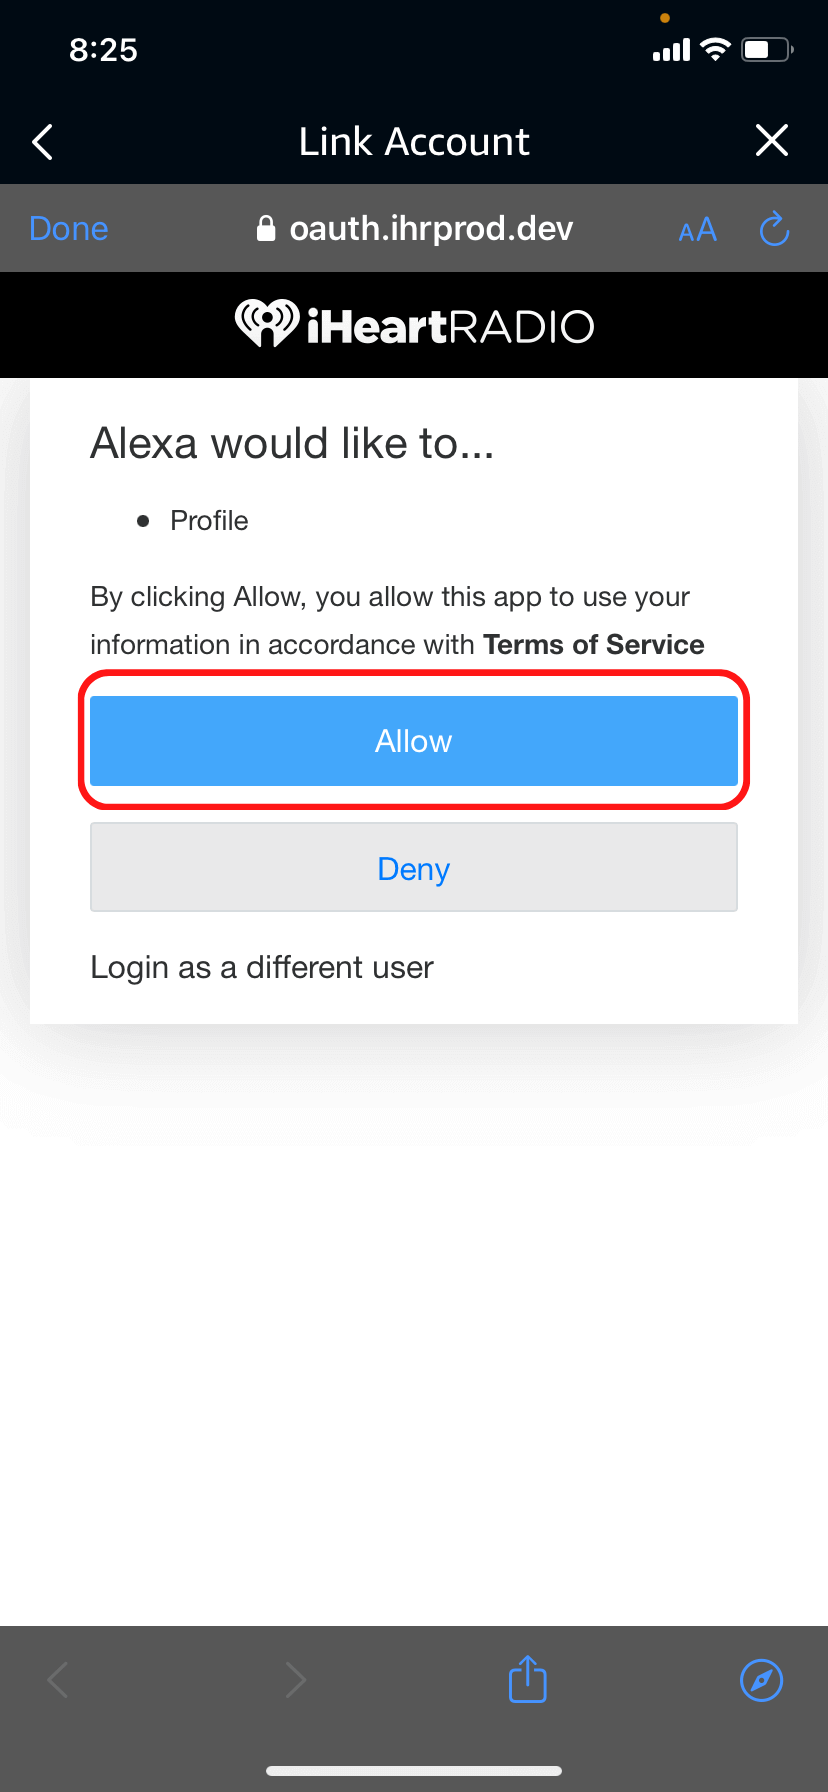 The access request screen when linking iHeartRadio to Alexa